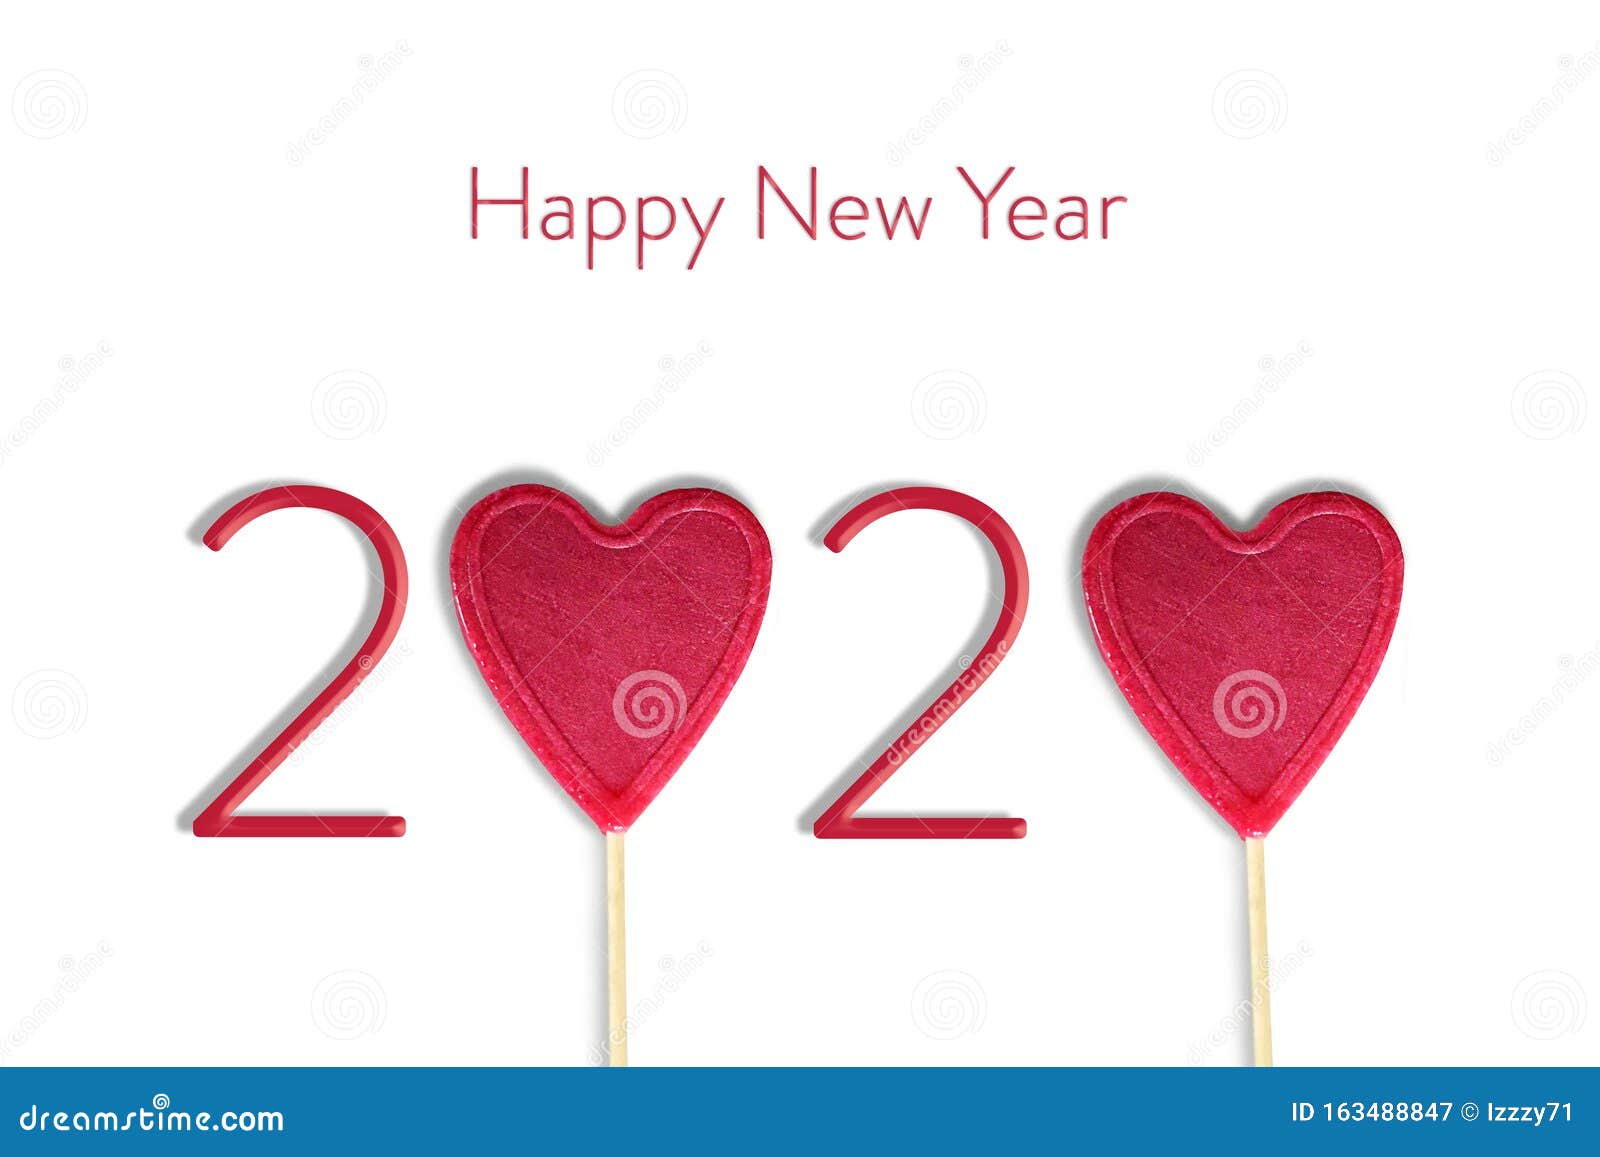 Happy New Year Card. 2020 New Year Concept Stock Image - Image of ...